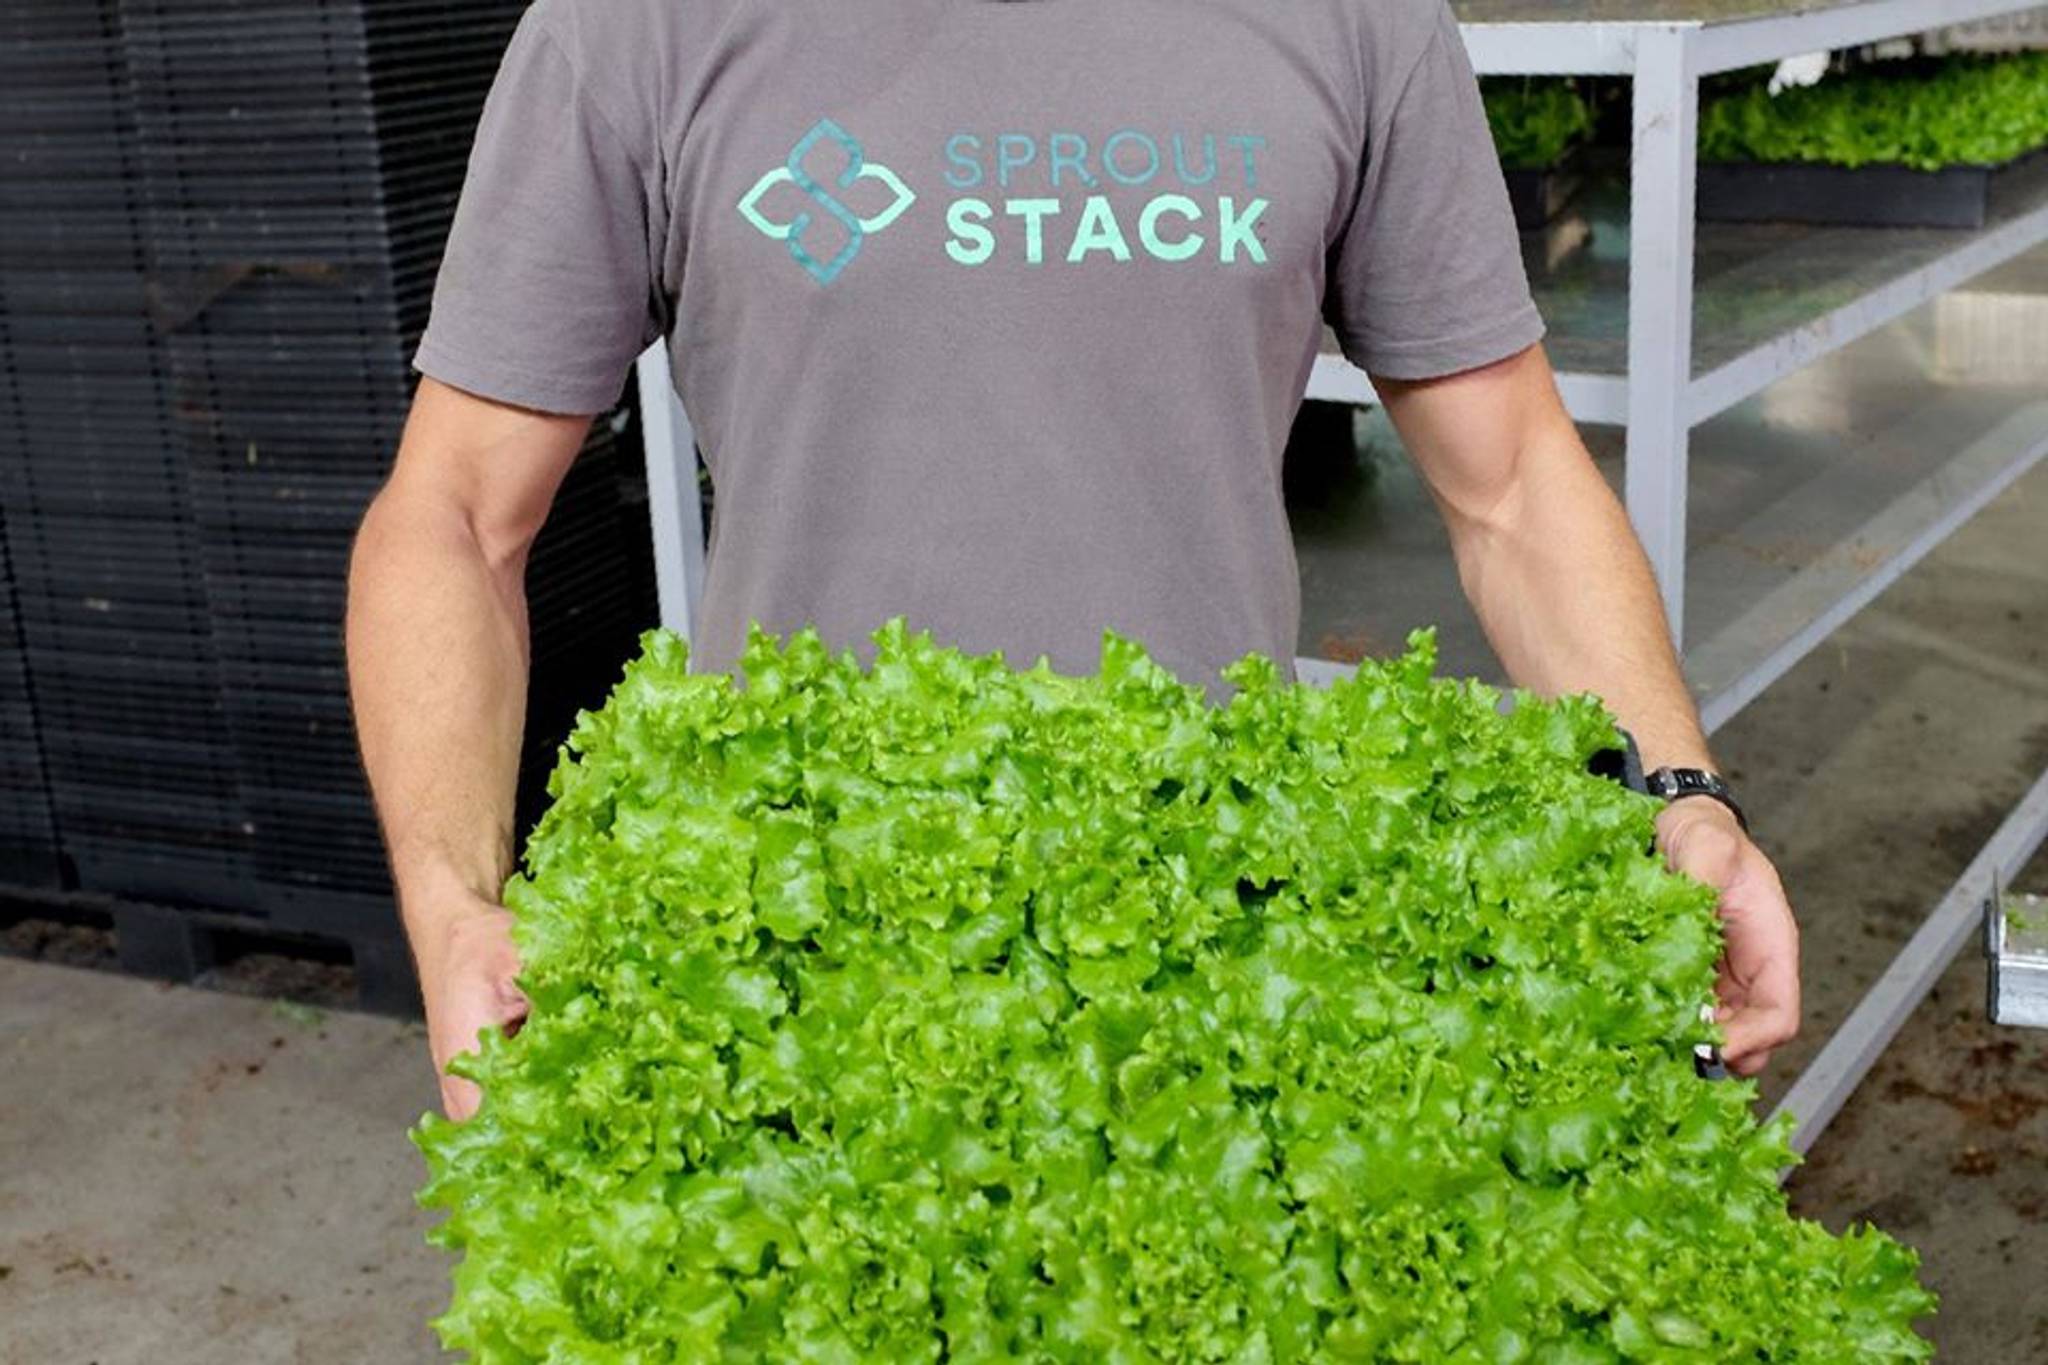 Sprout Stack brings farm-fresh produce to Aussie cities